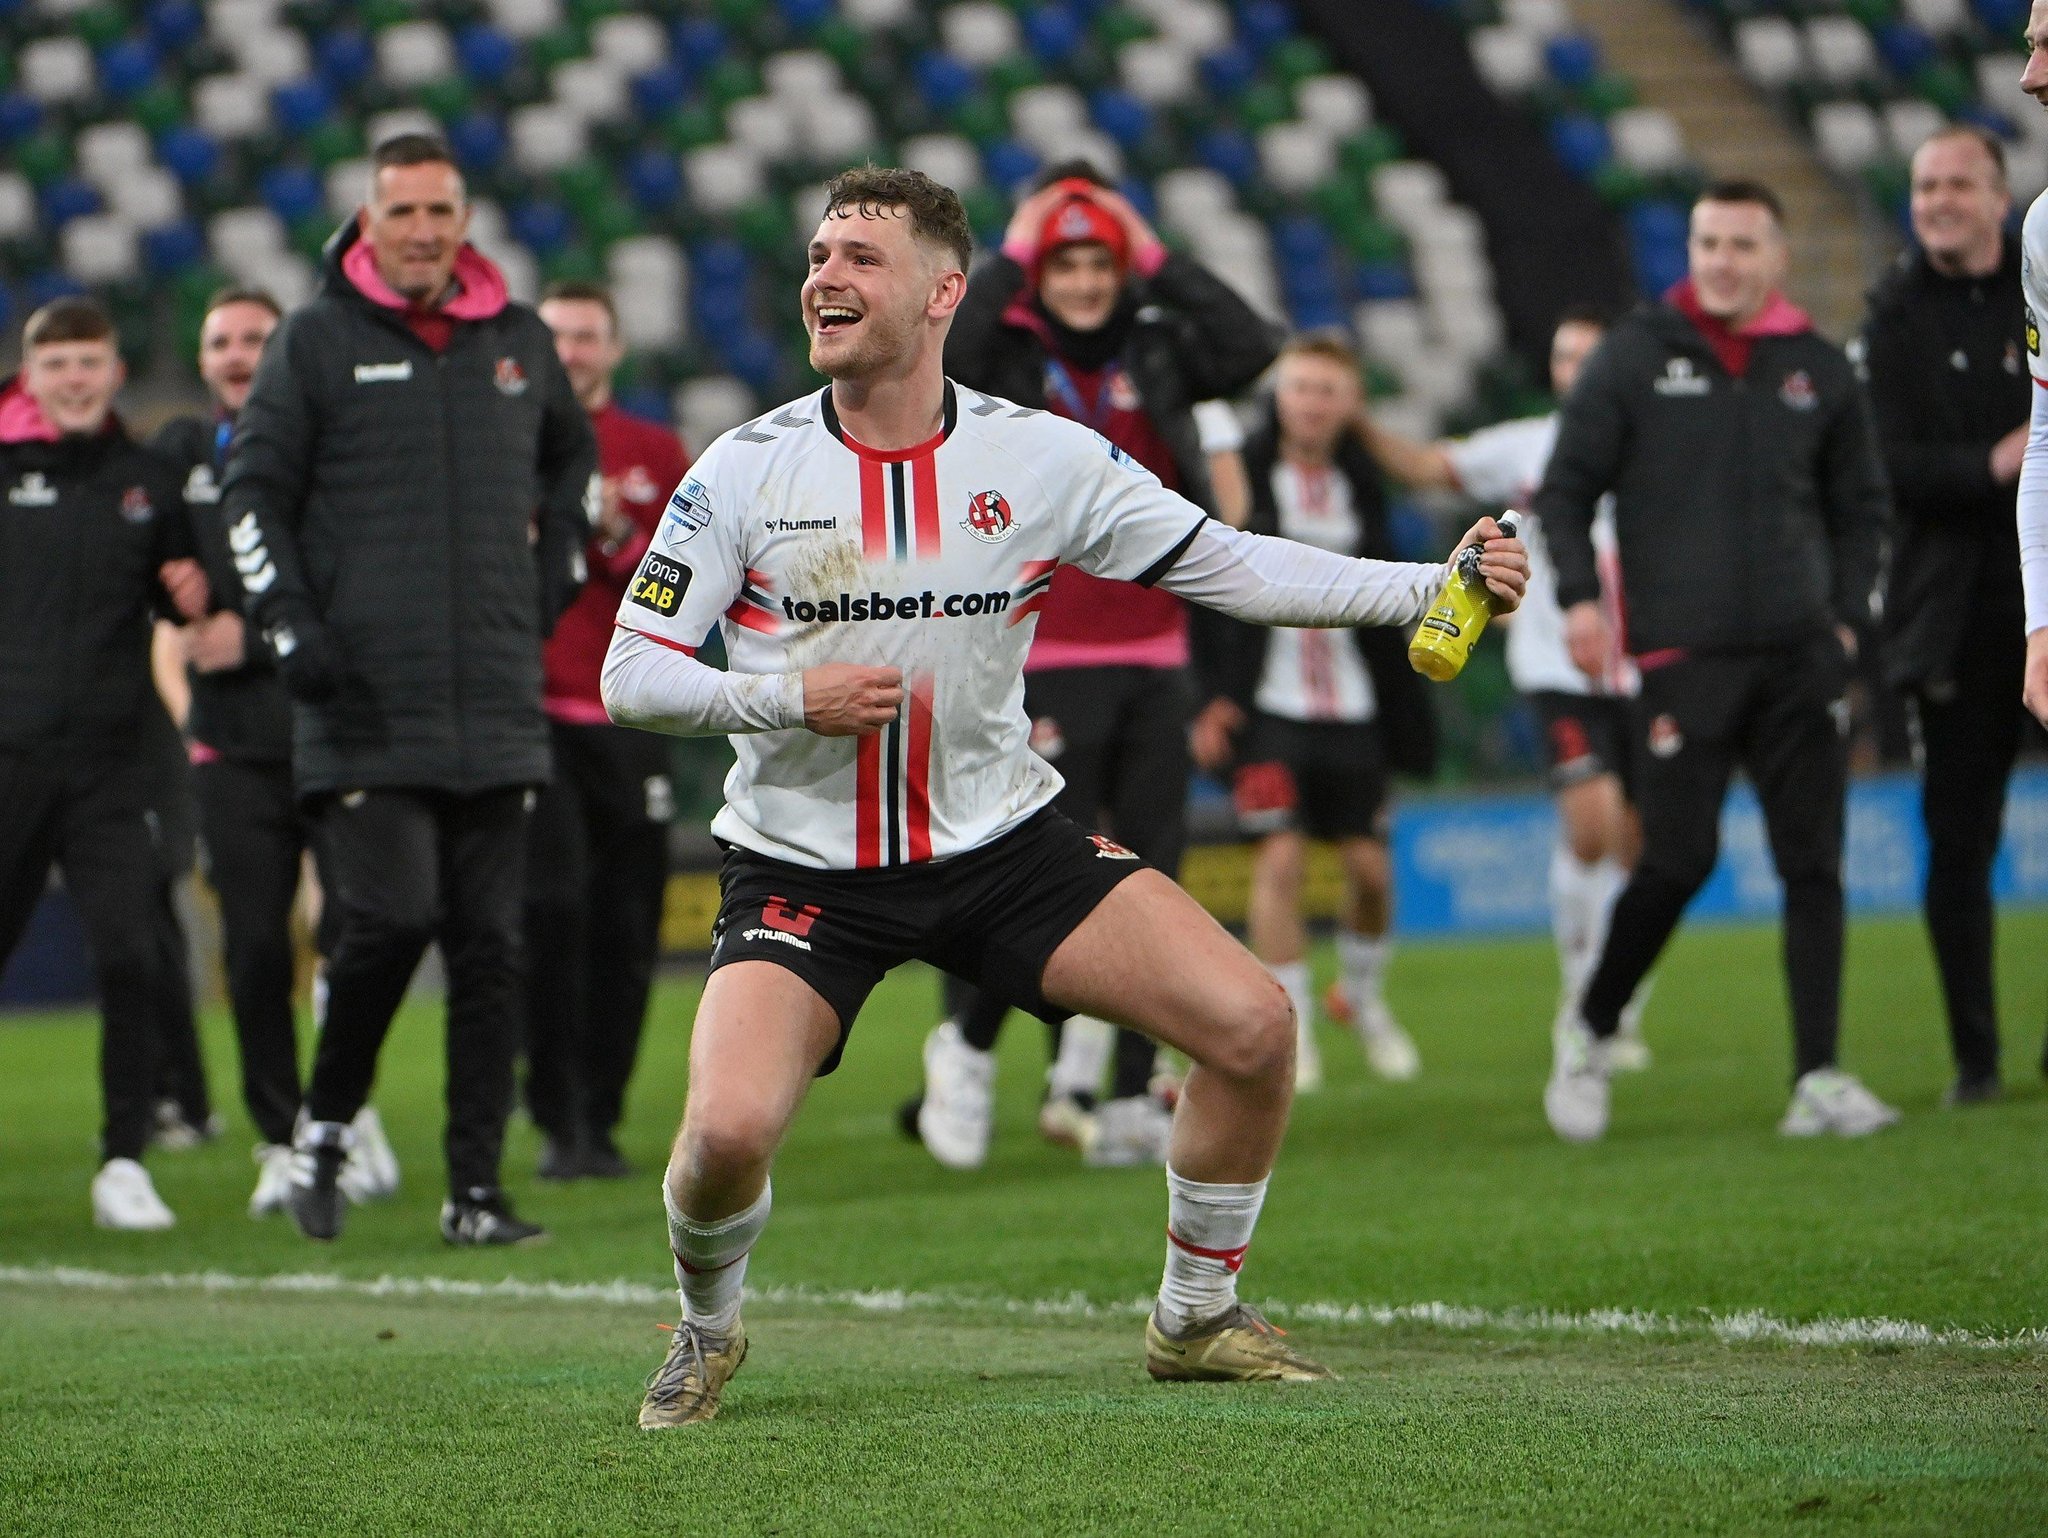 Pain turns to glory as Crusaders battle back for Irish Cup semi-final joy